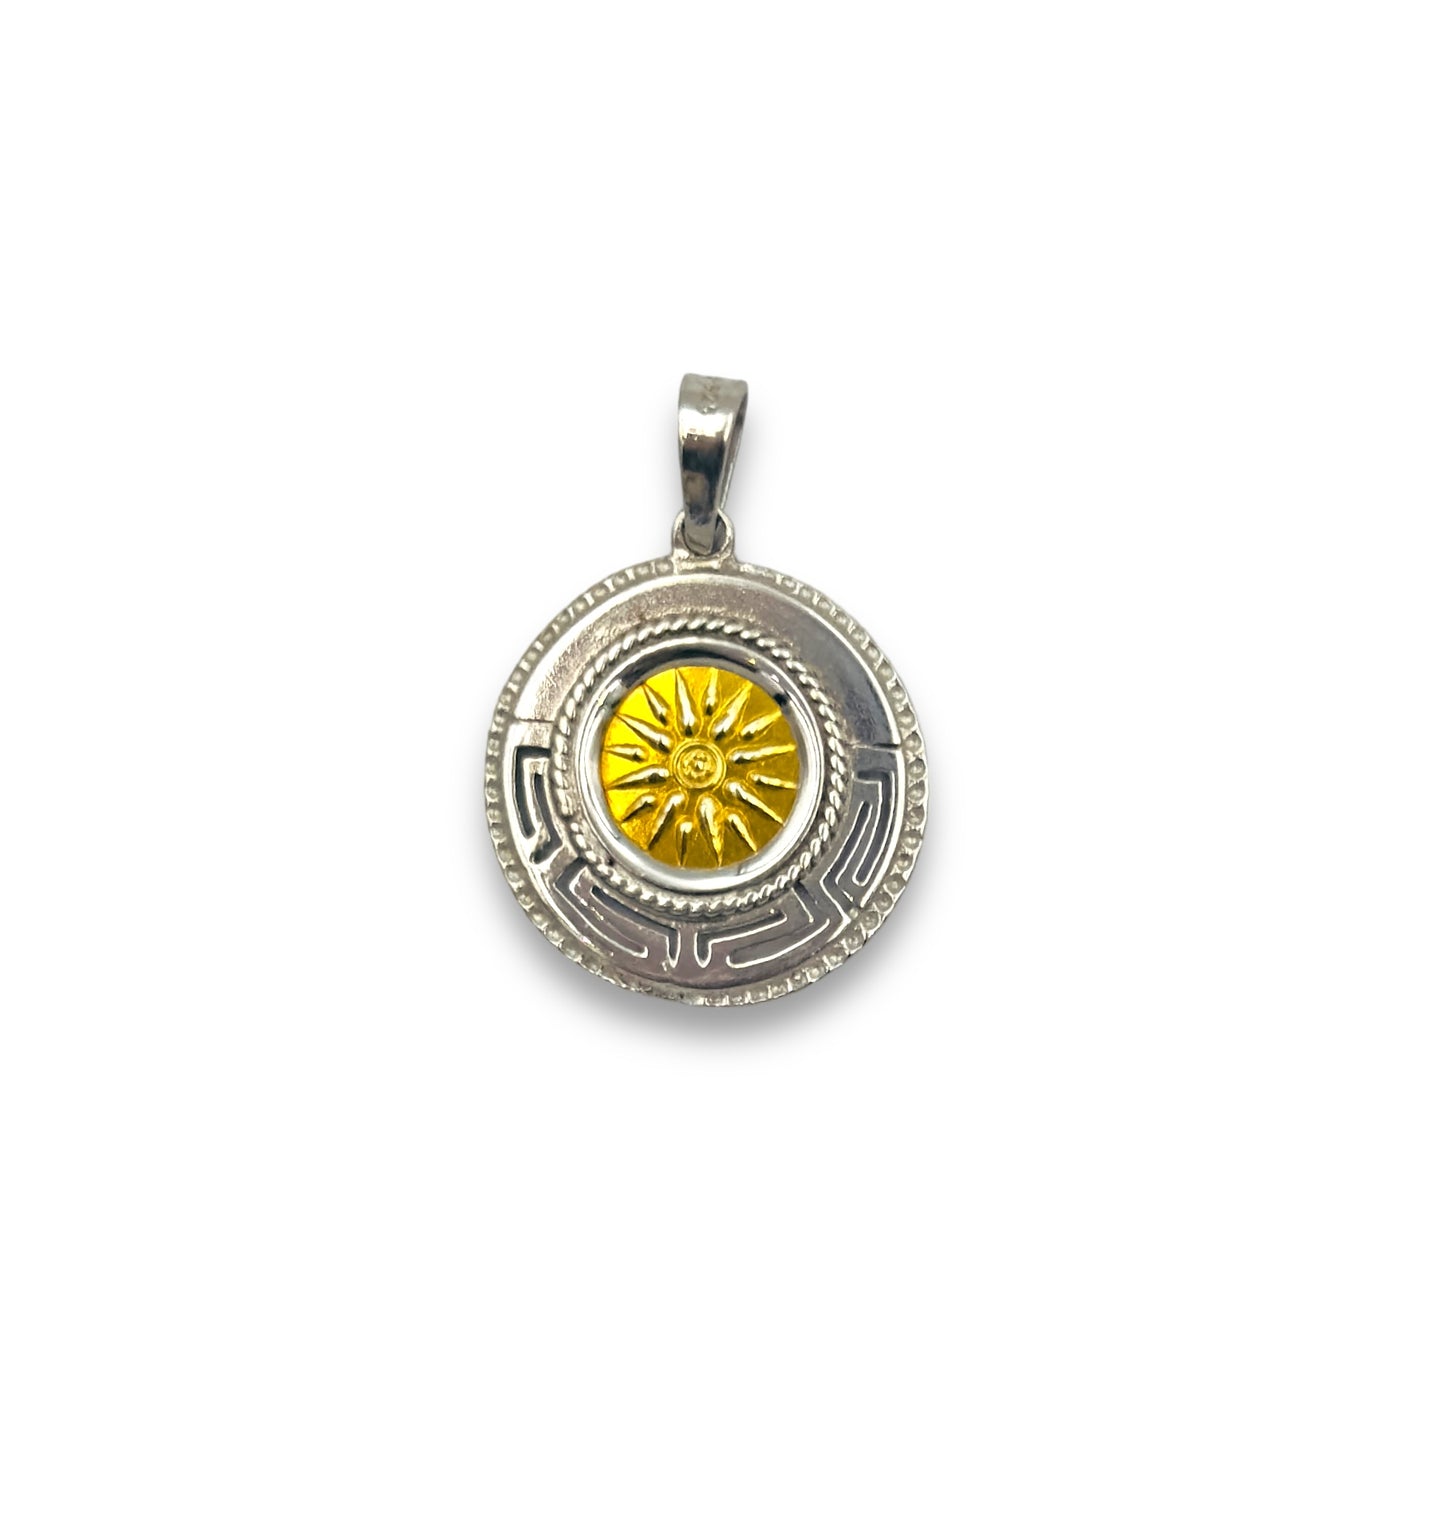 Silver two-toned Sun of Vergina pendant enclosed with Meander design